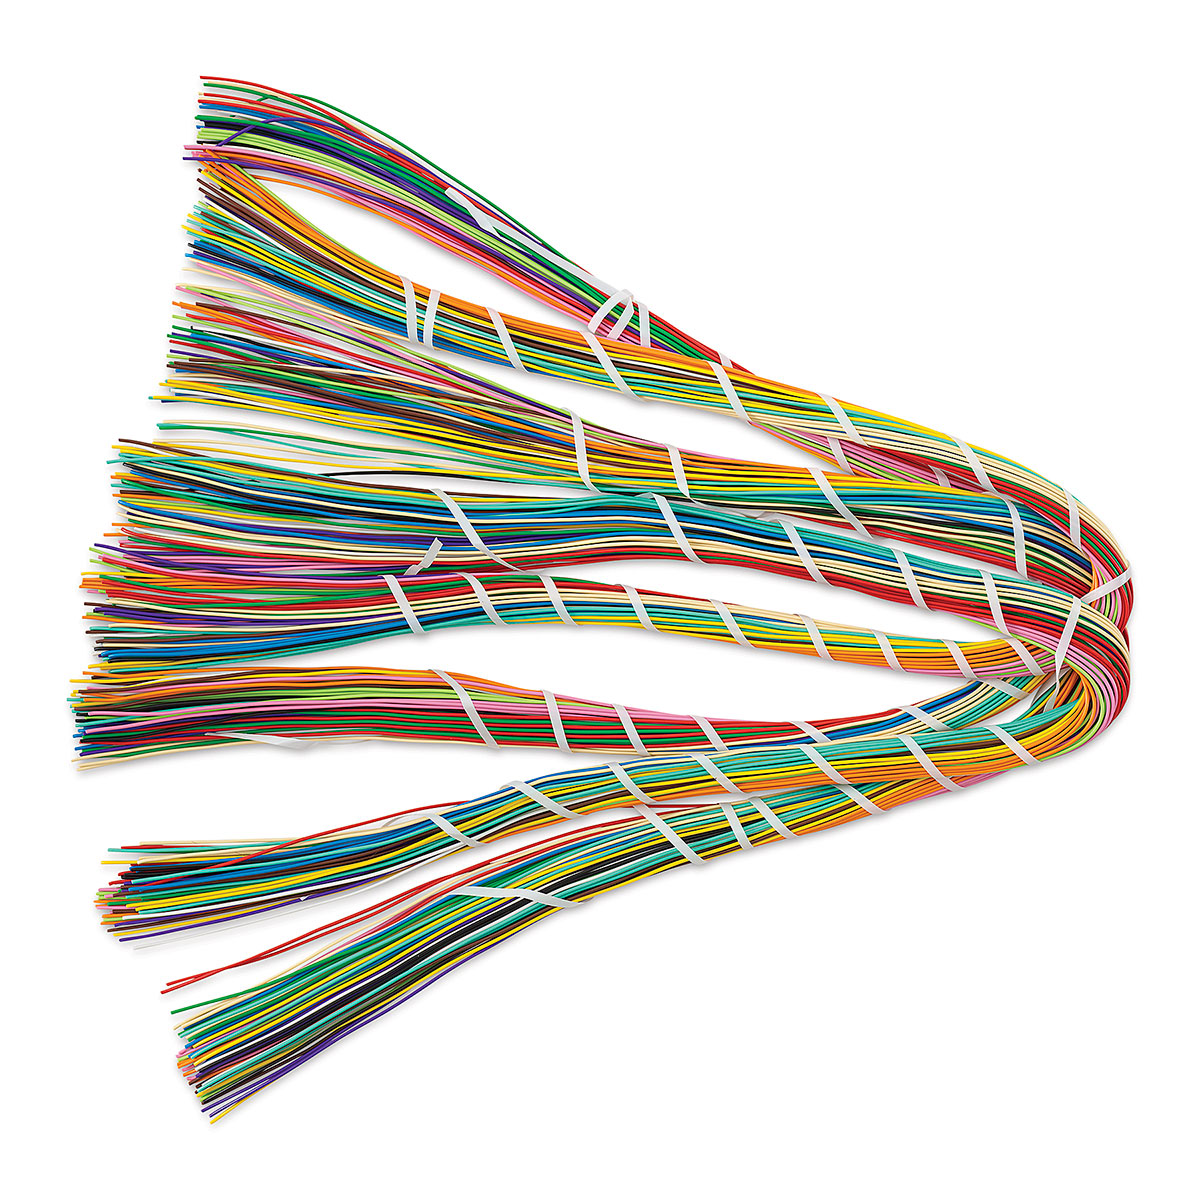 Twisteez Craft Sculpture Wire, 125 ft, Assorted Color, Pack of 50